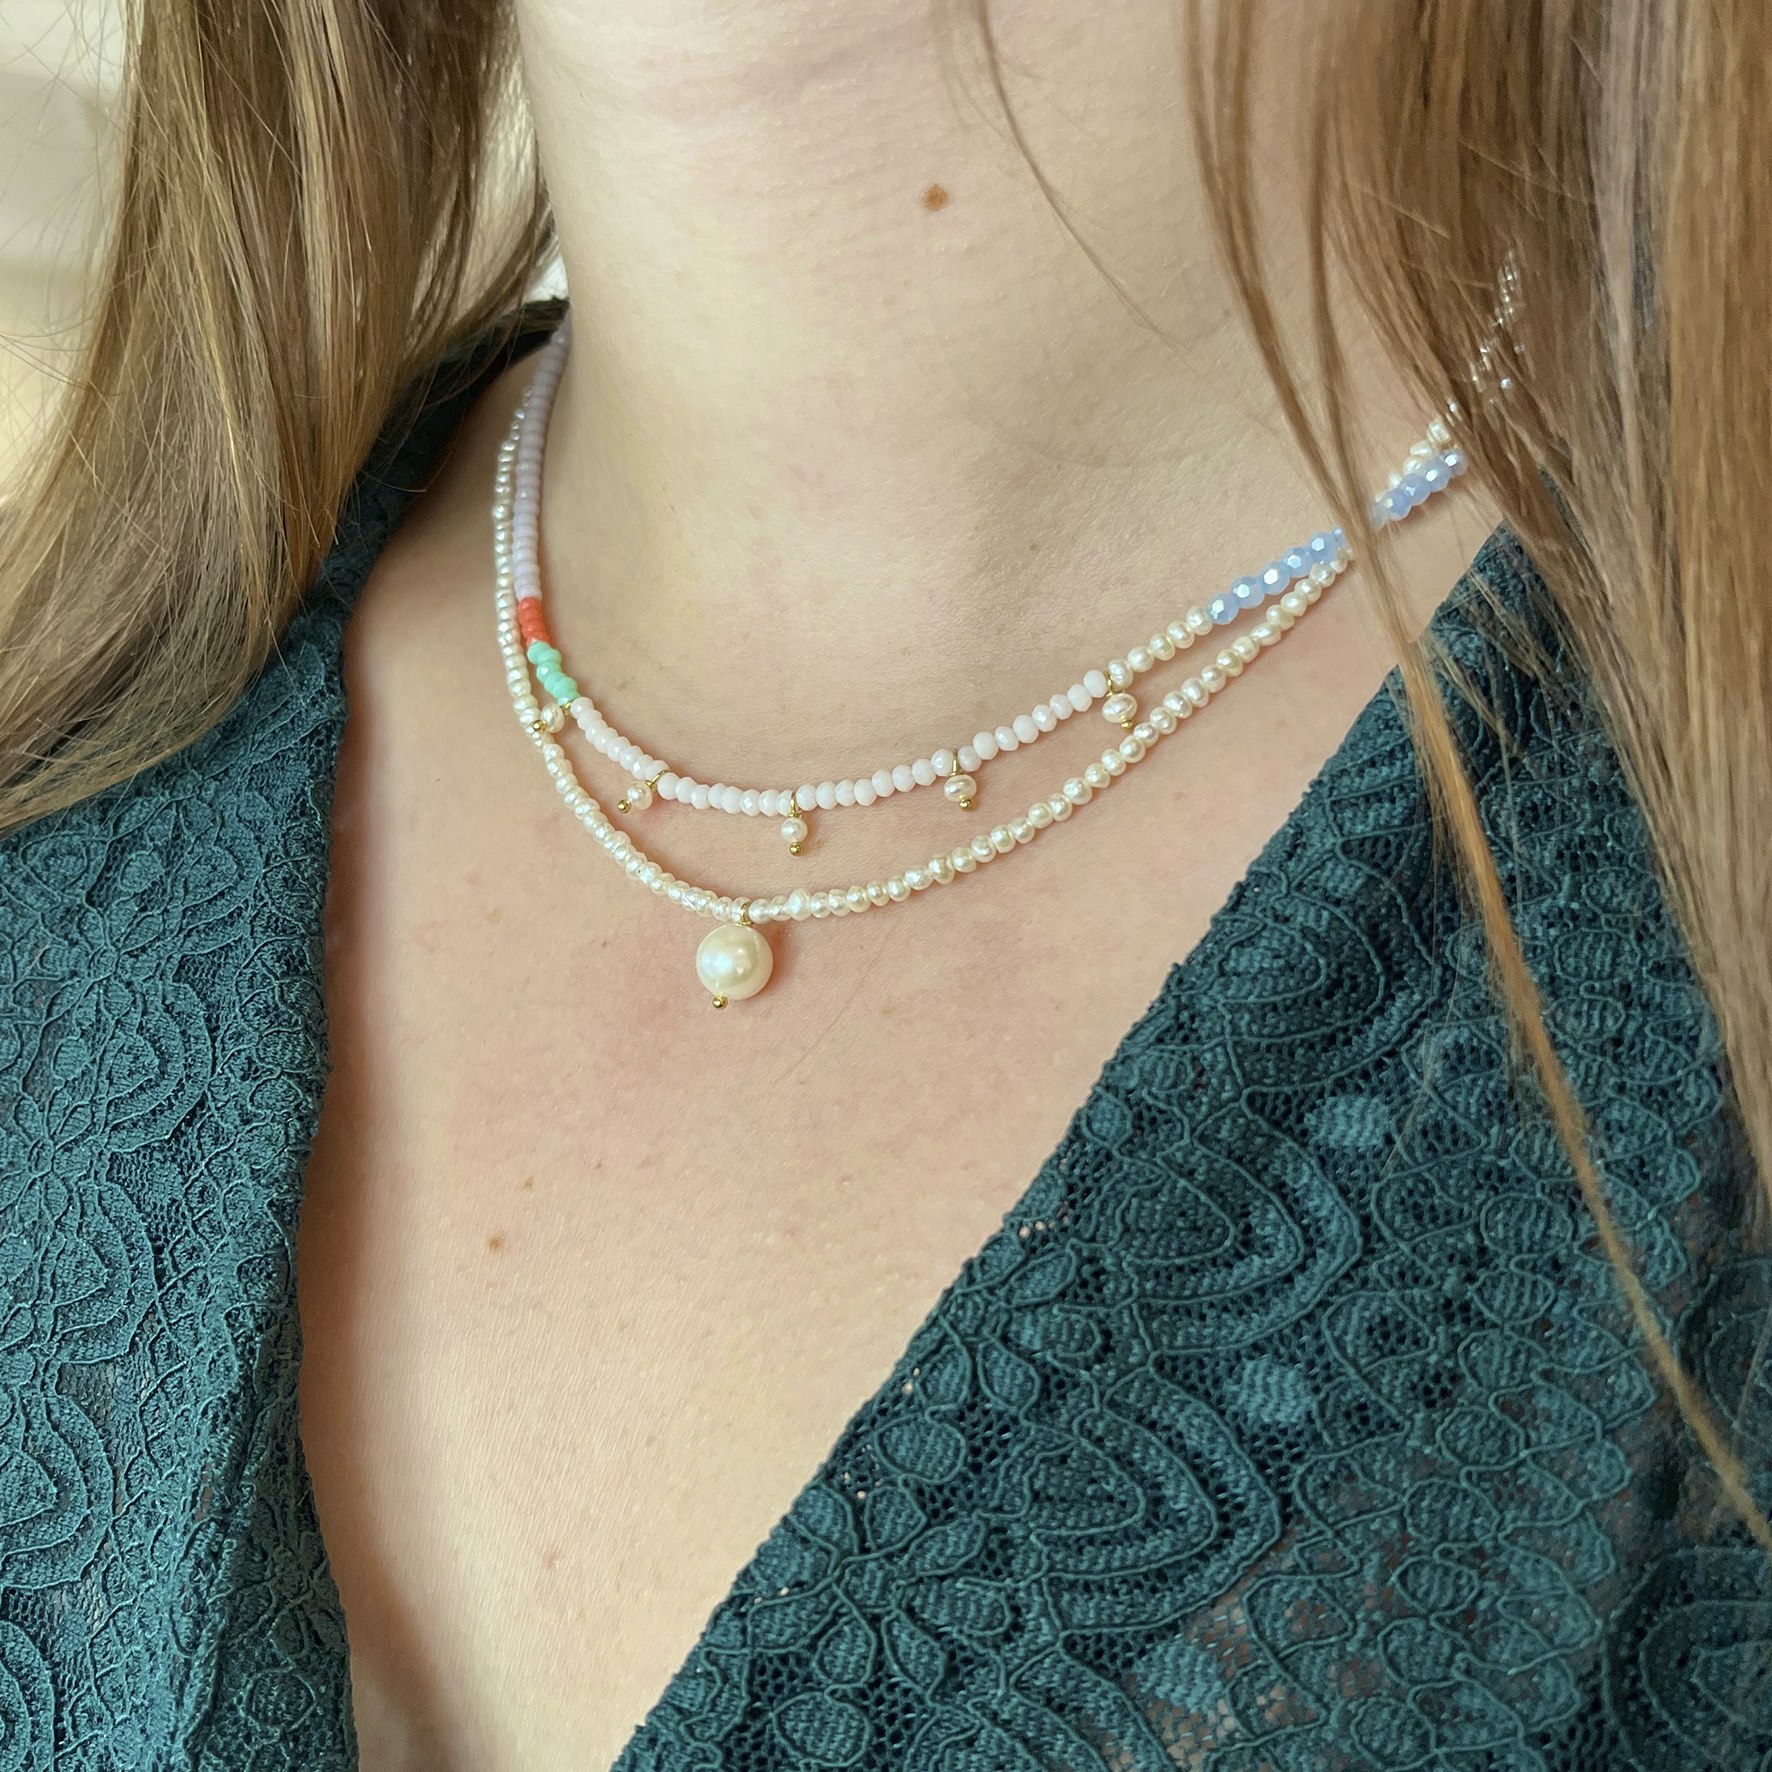 Heavenly Pearl Dream Necklace With Five Pendants Coral & Cool Mint from STINE A Jewelry in Goldplated Silver Sterling 925